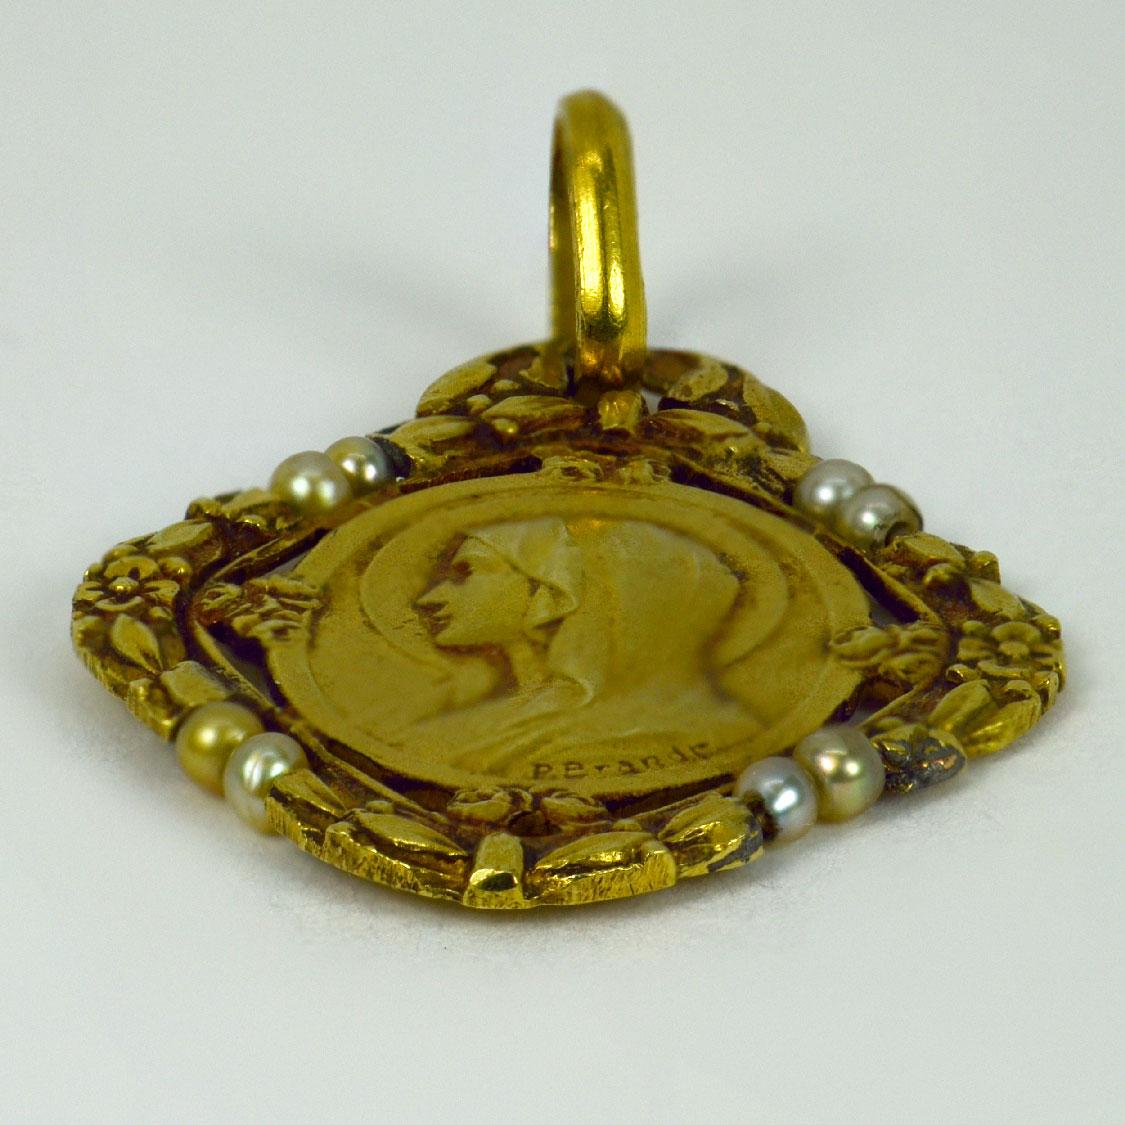 A French 18 karat (18K) yellow gold charm pendant designed as a medal depicting the Virgin Mary within a frame of roses and flowers set with eight natural seed pearls. Signed P. Brandt for Paul Brandt. Stamped with the eagles head for French